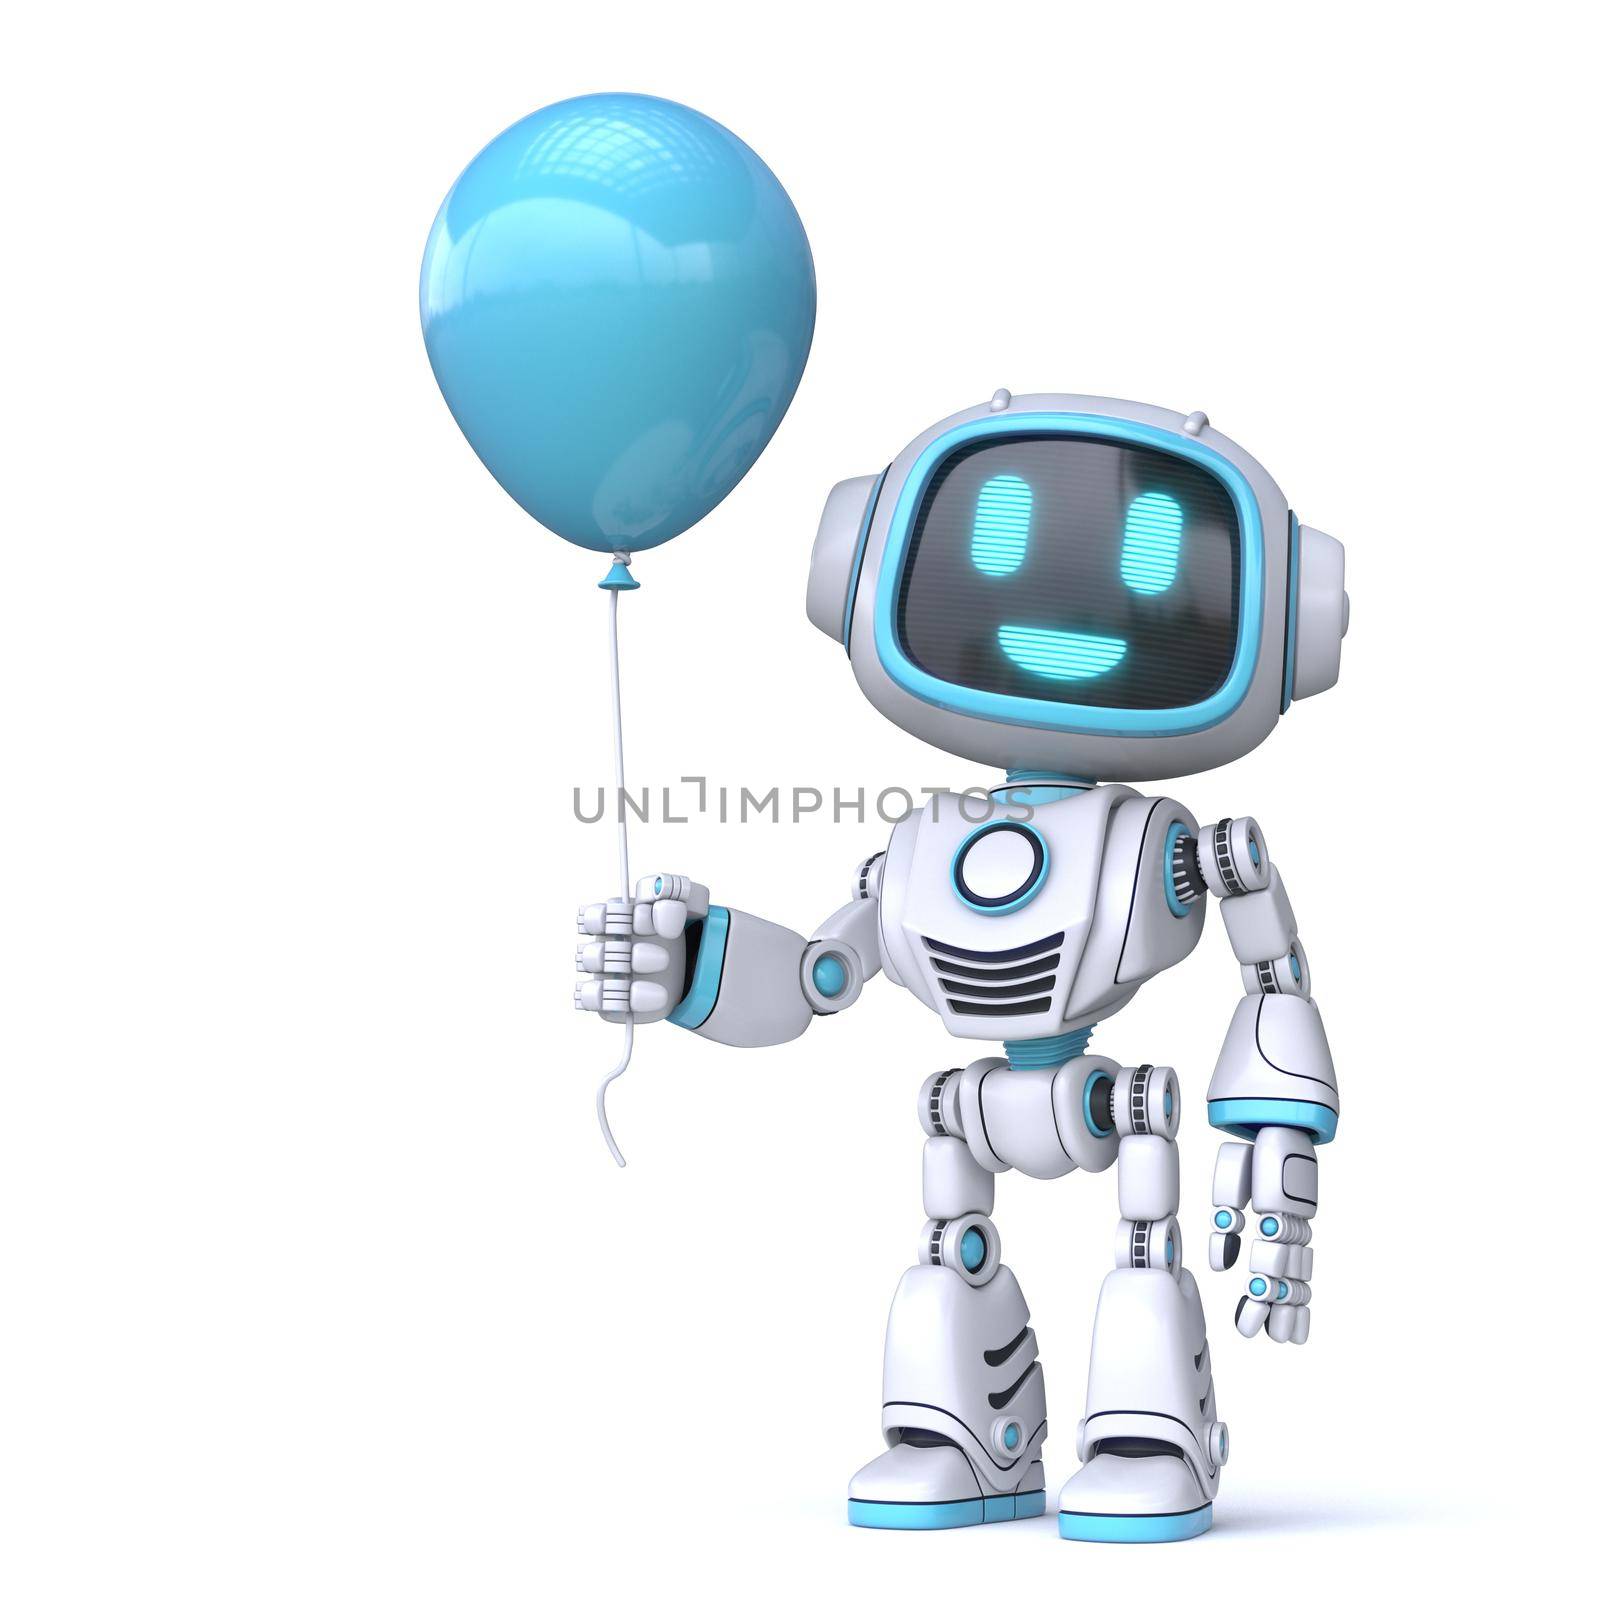 Cute blue robot hold blue balloon 3D rendering illustration isolated on white background